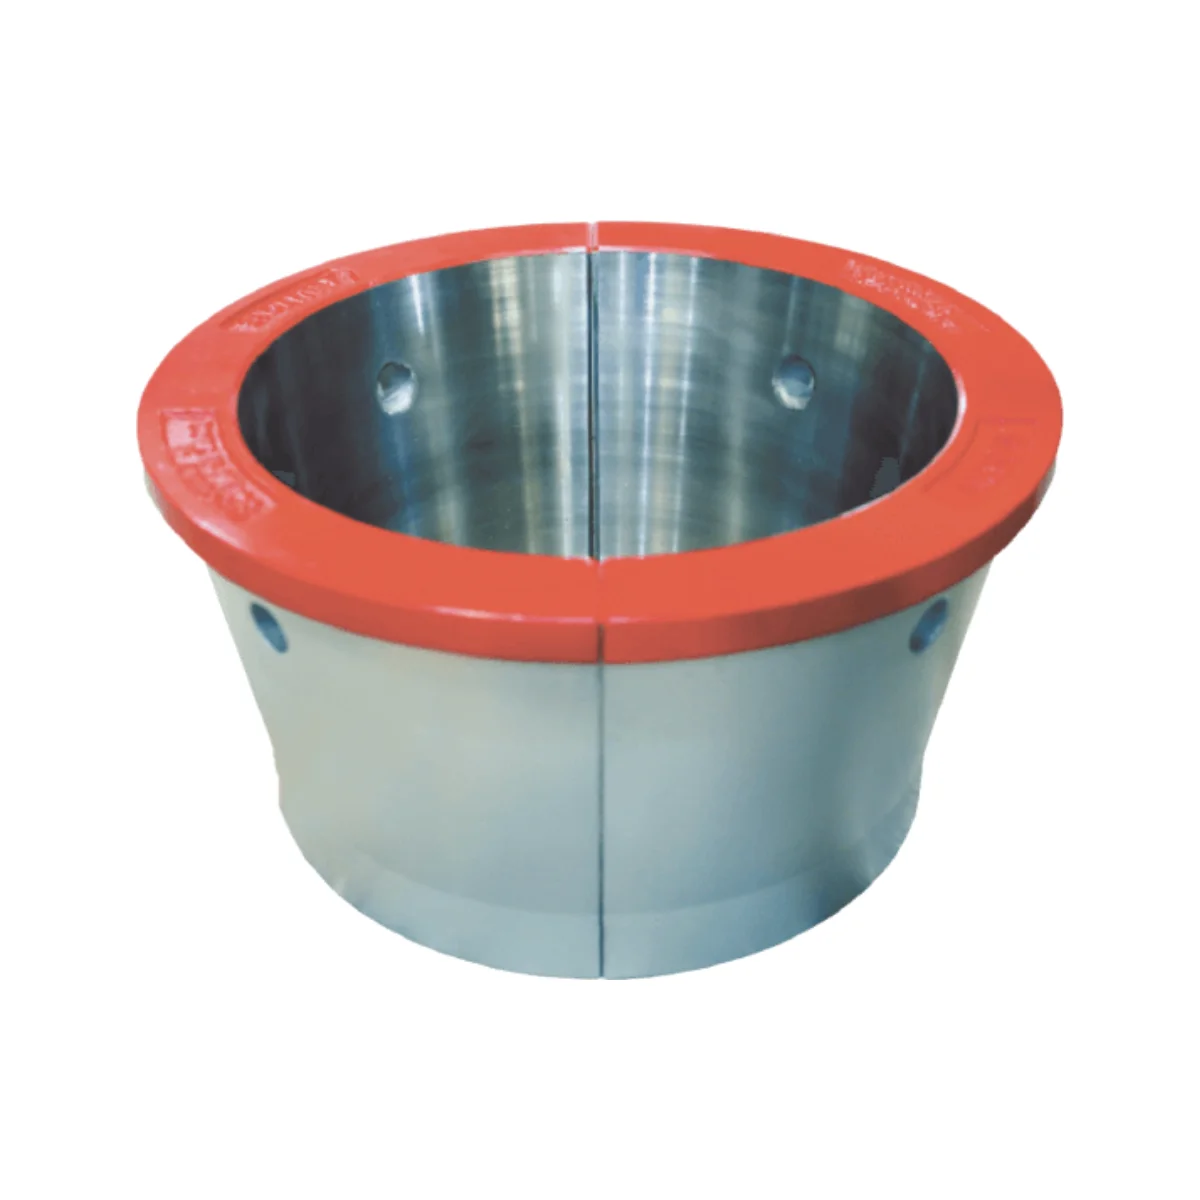 Casing Bushing Bowl No. 1 securely holds casing strings, ensuring precise alignment and reliable support in oilfield drilling operations.